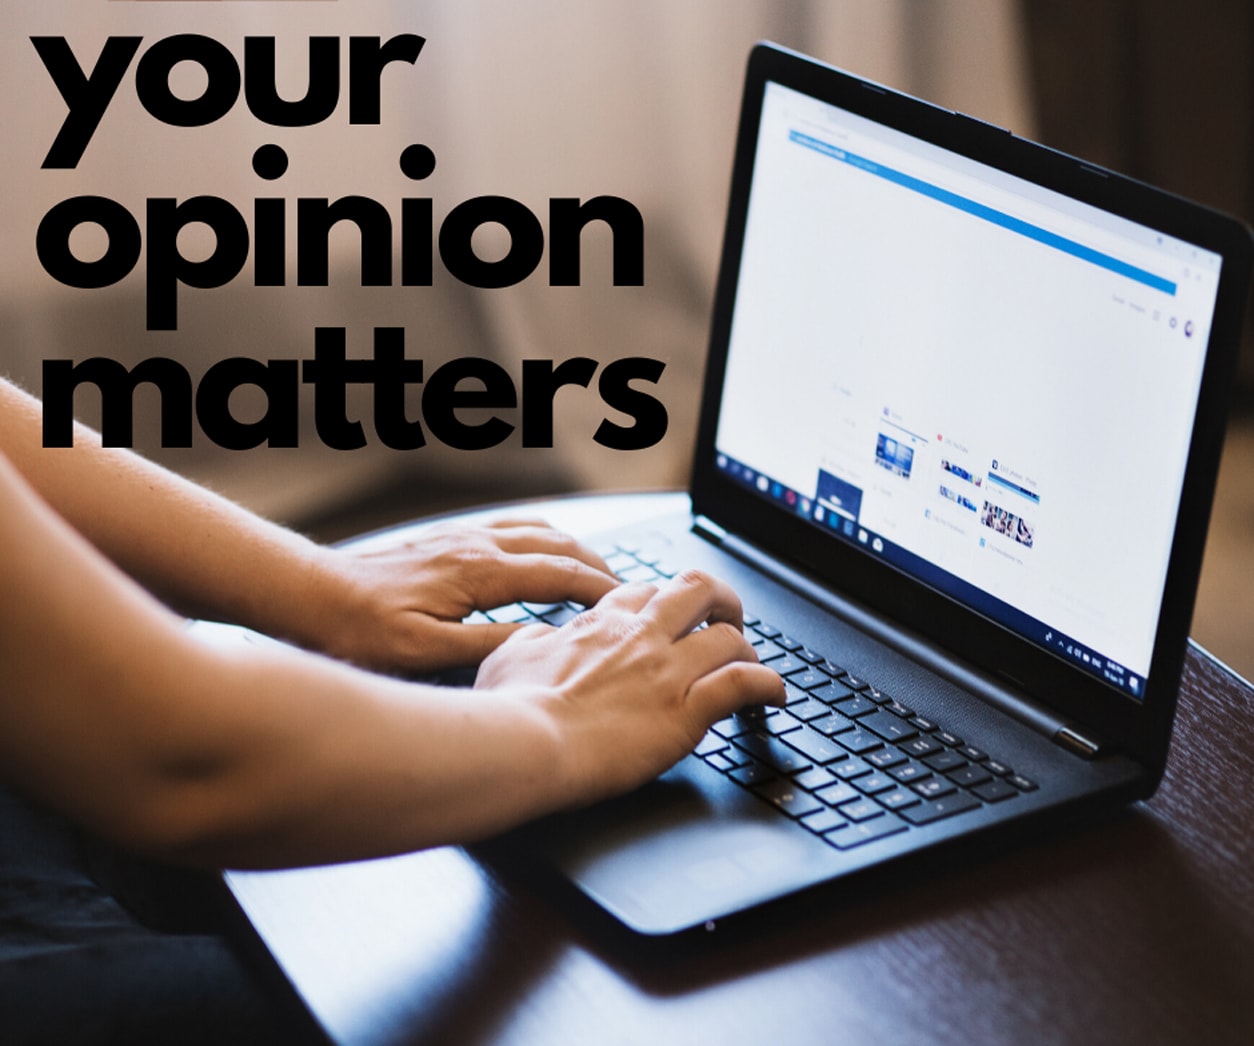 Massapequa Takes Action - Your Opinion Matters